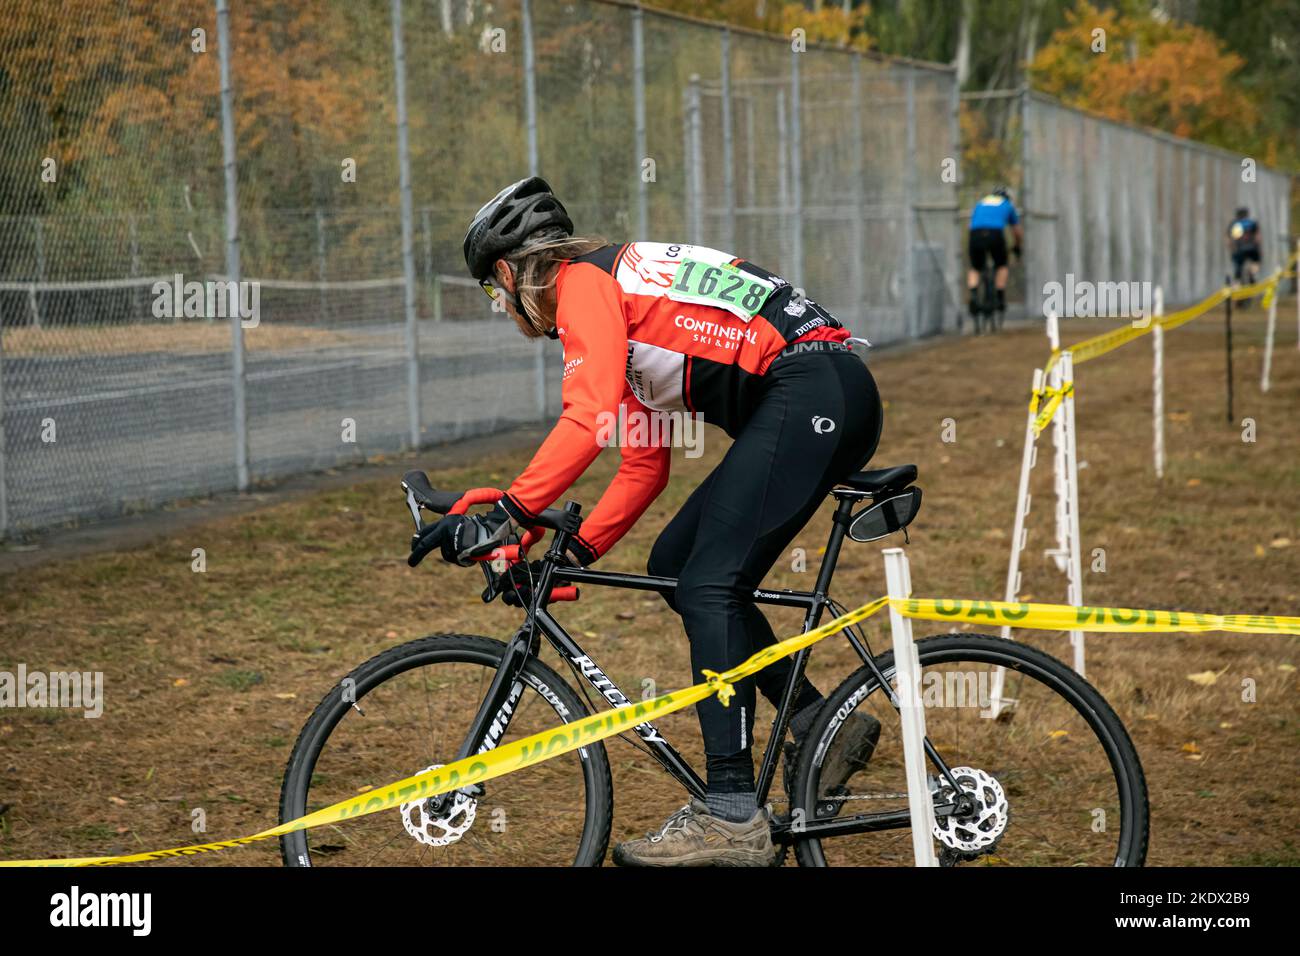 WA22734-00...WASHINGTON - Rider, Tom Kirkandall, following the route tape and making a sharp turn at the Magnuson Park  MFG cyclocross race in Seattle Stock Photo